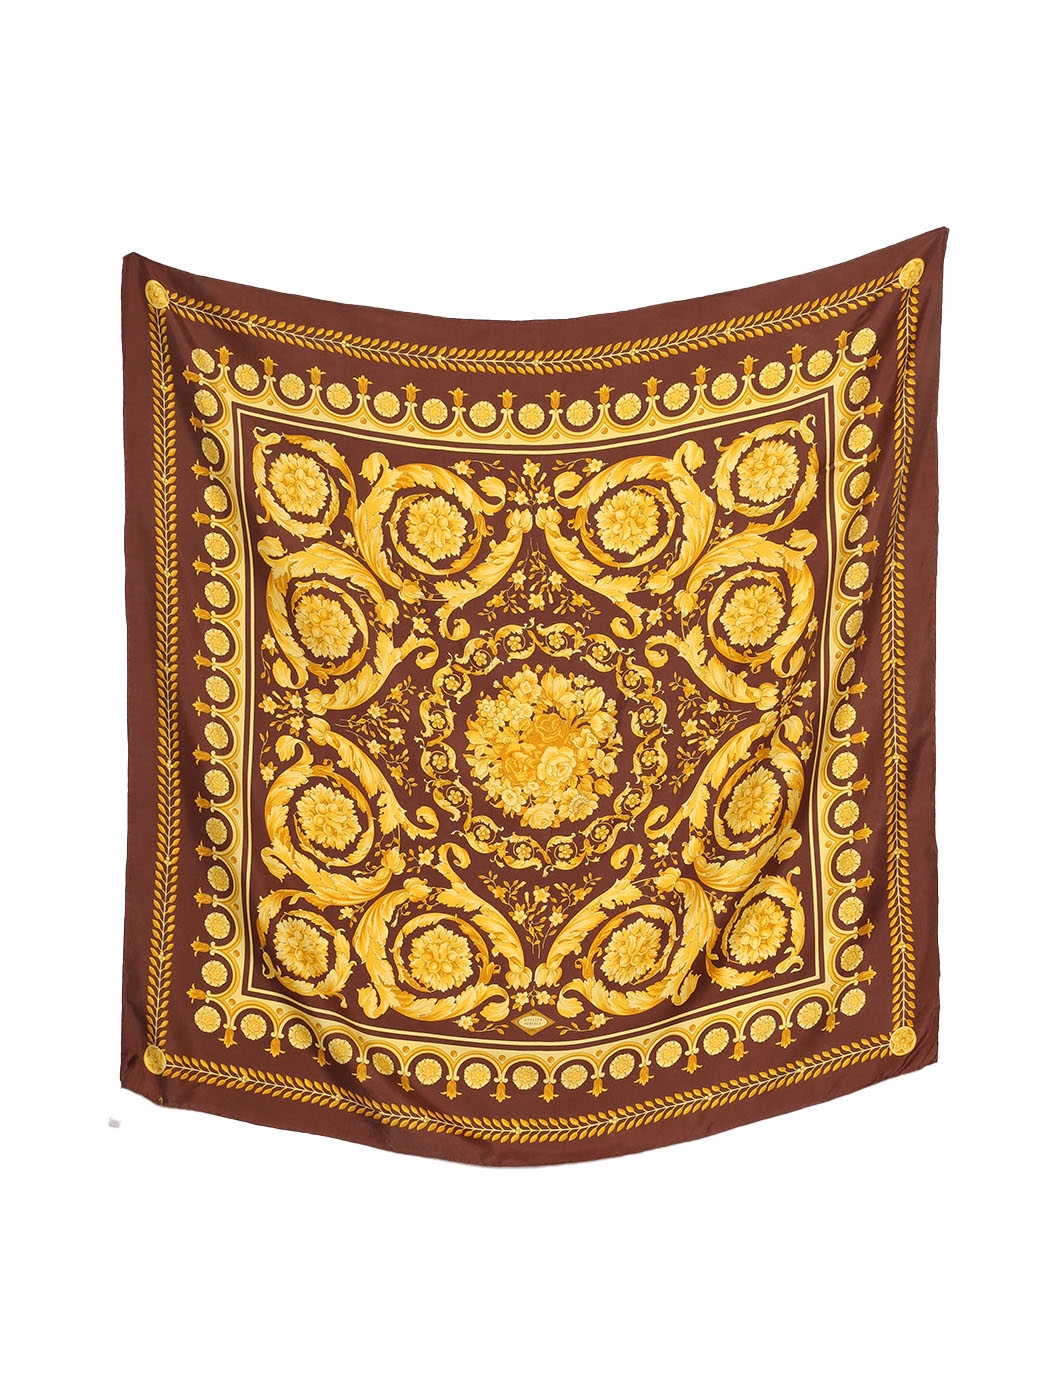 Boutique VERSACE Square silk scarf printed coffee brown and golden yellow  Retail price 385€ Size 90 x 90